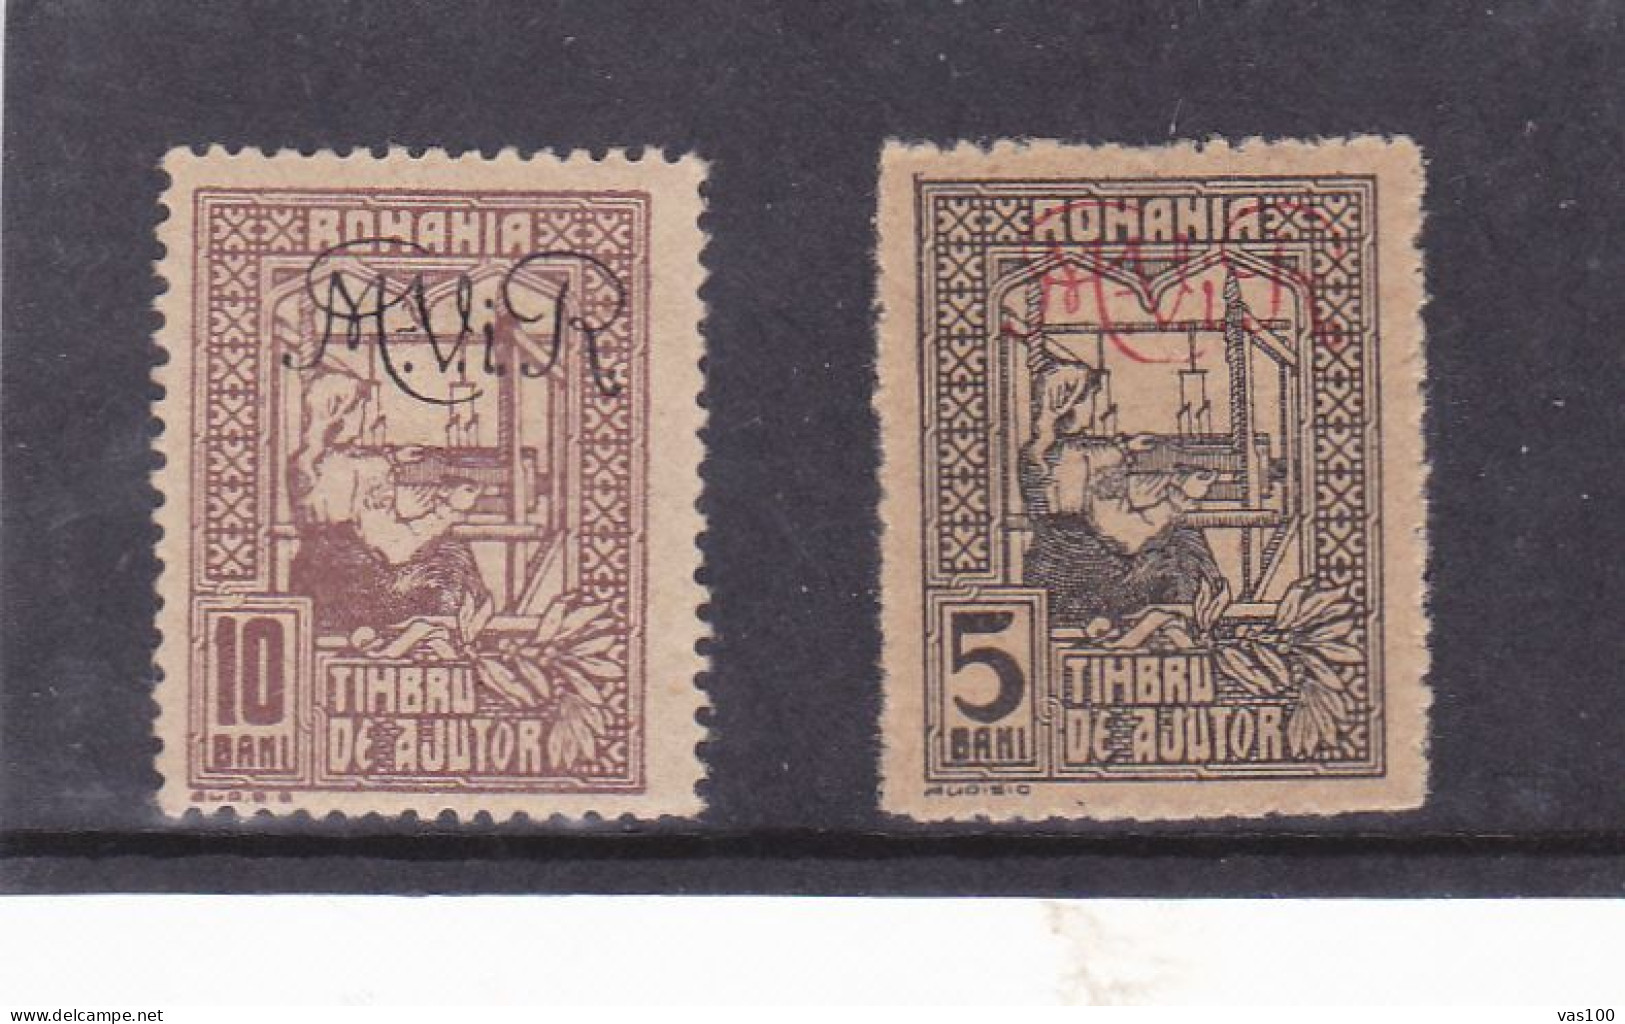 Germany WW1 Occupation In Romania 1917 MViR 5 +10 BANI 2 STAMPS POSTAGE DUE MINT - Besetzungen